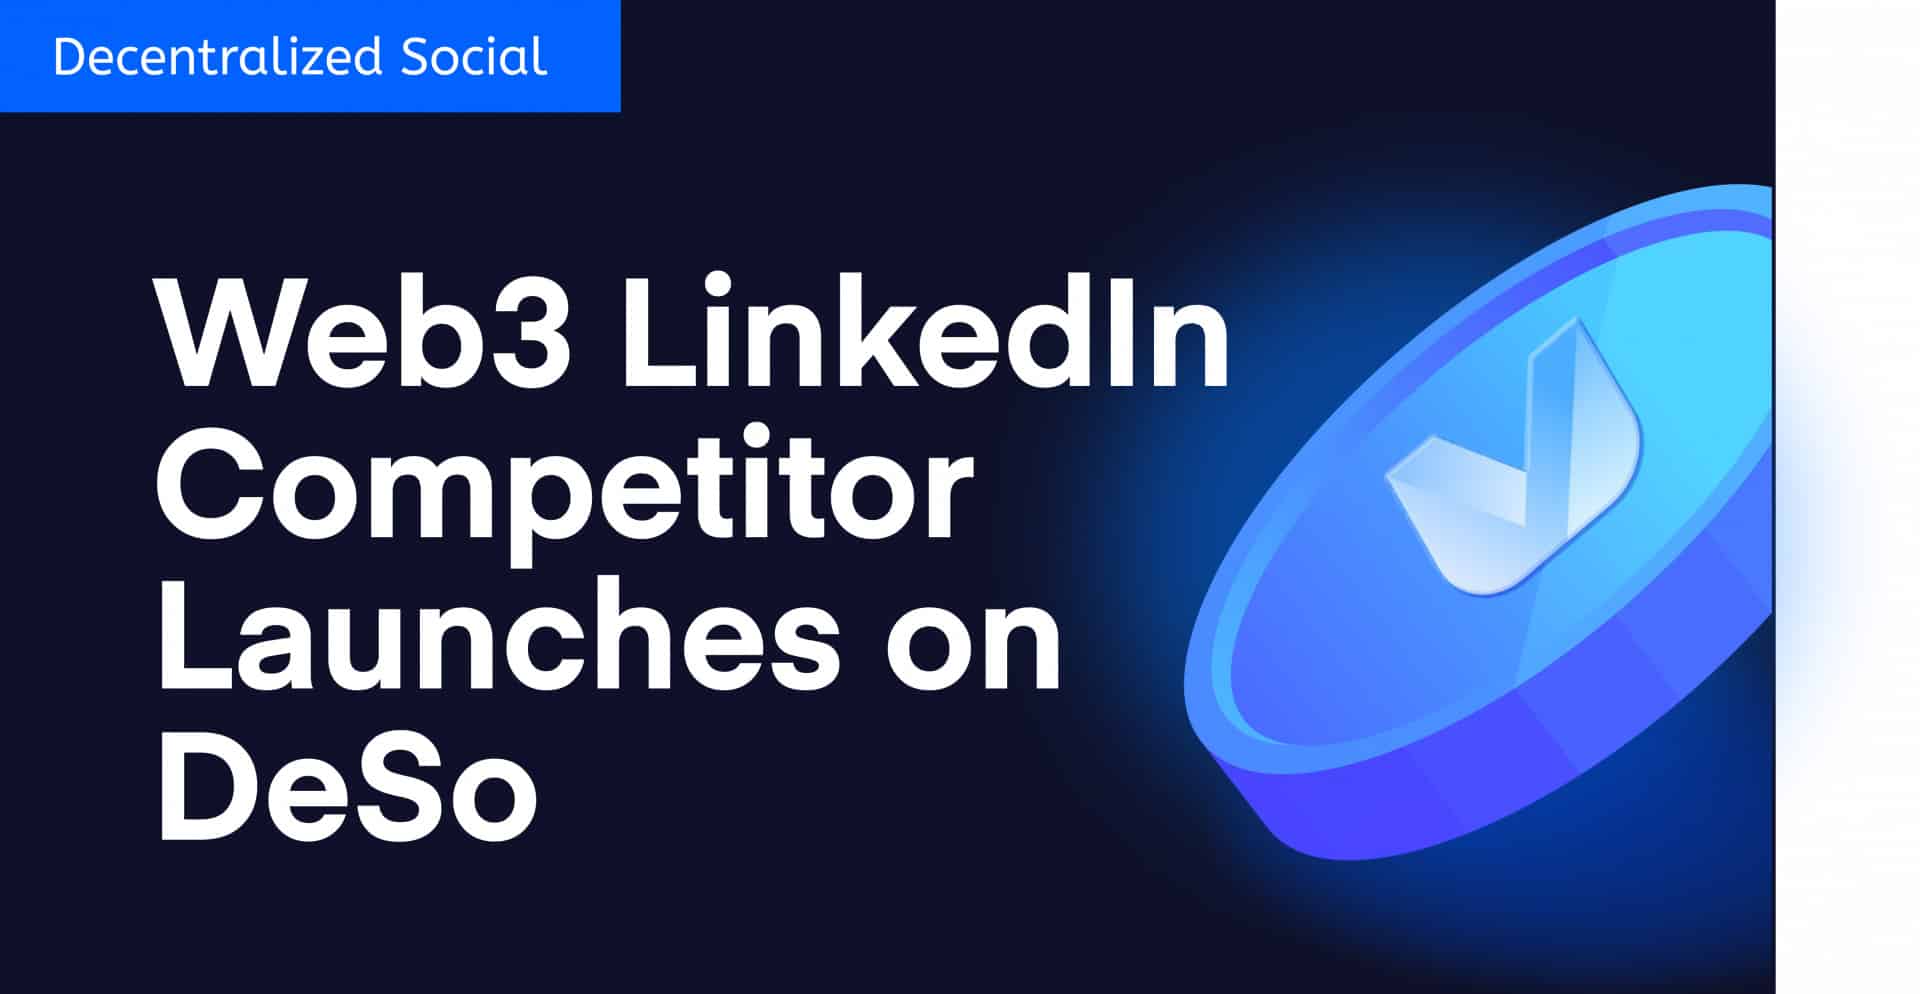 Decentralized-web3-linkedin-competitor-launches-on-deso